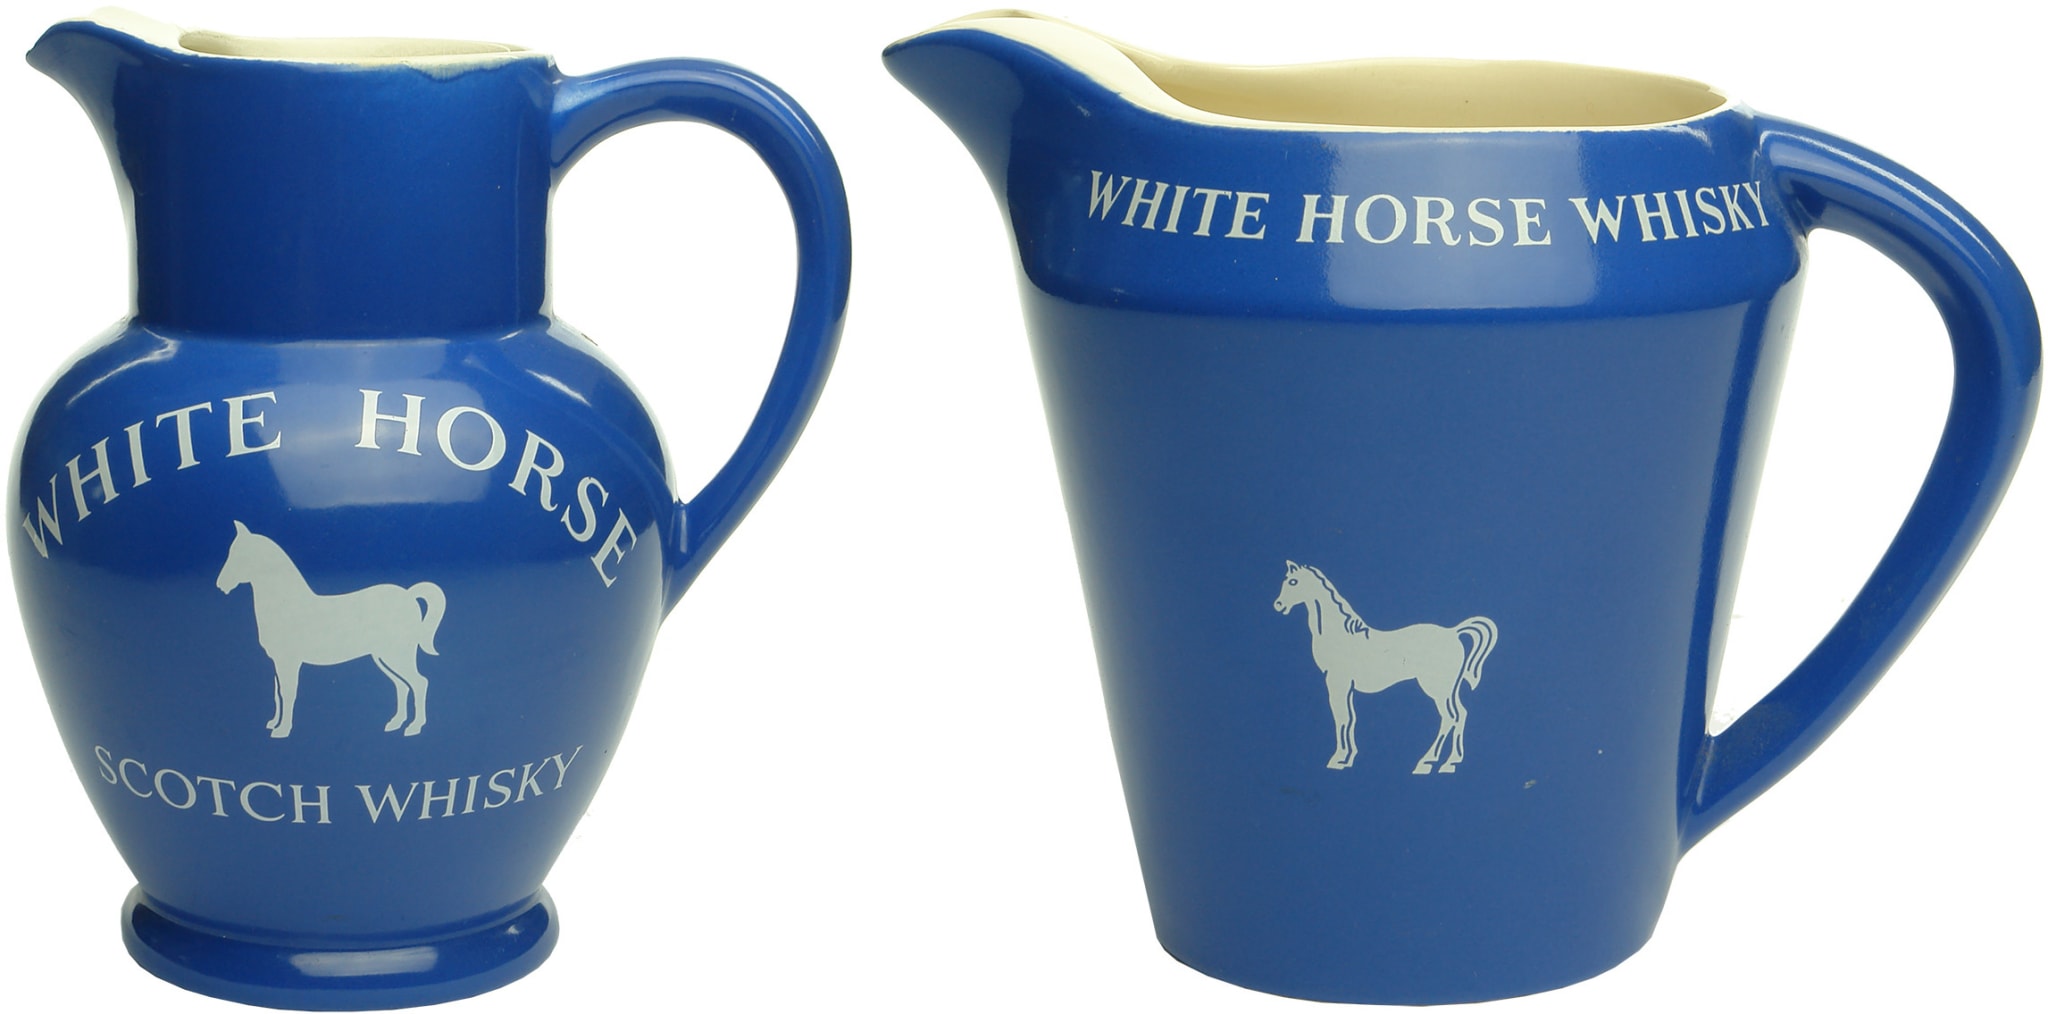 White Horse Scotch Whisky Water Jugs